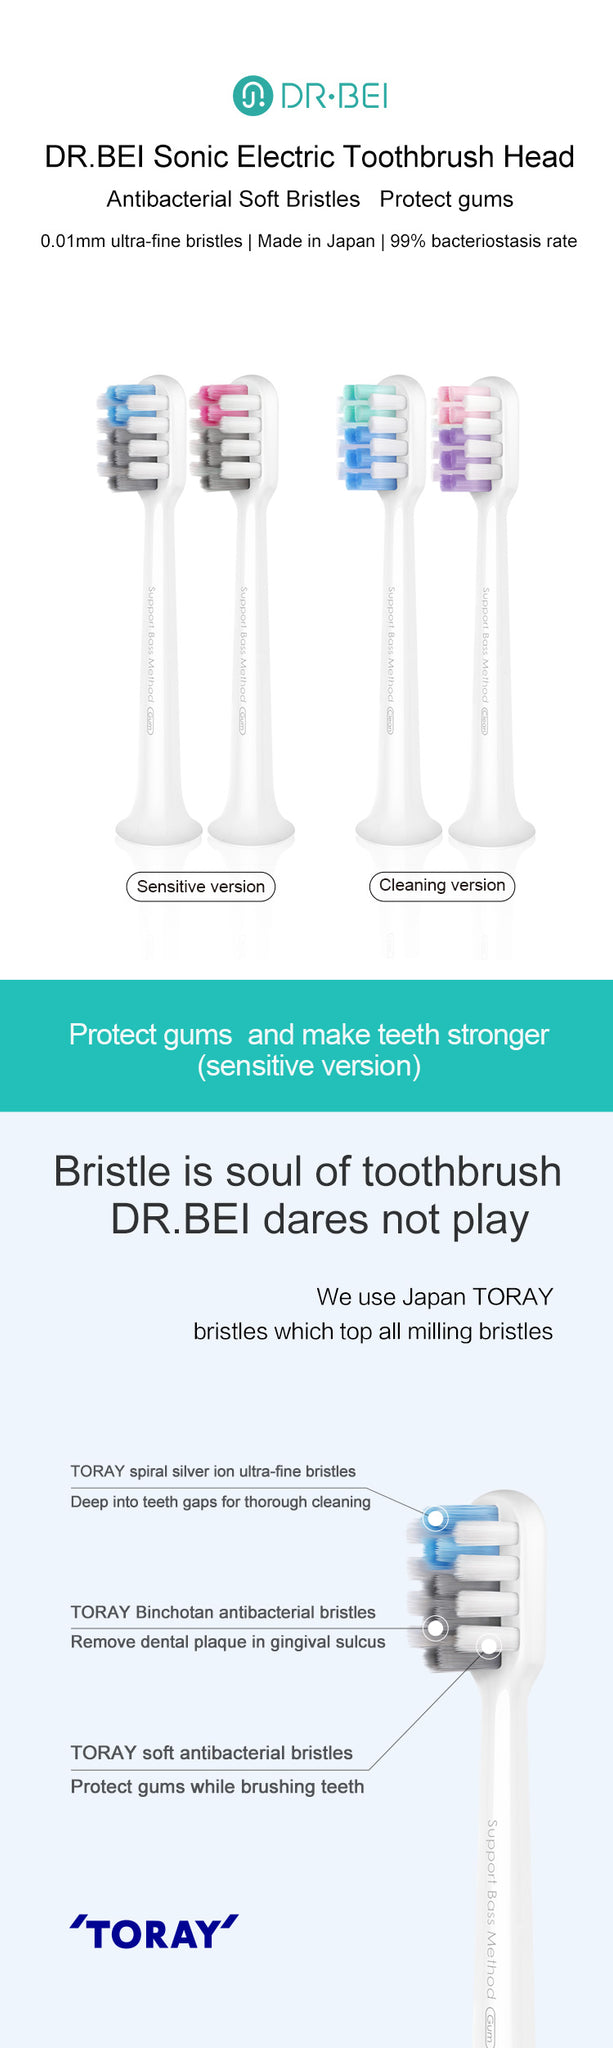 DR.BEI C1 Toothbrush Heads, 2 Pieces Xiaomi Youpin DR·BEI Electric Toothbrush Heads for DR.BEI C01 Sonic Electric Toothbrush Replaceable Sensitive / Cleaning Tooth Brush Heads